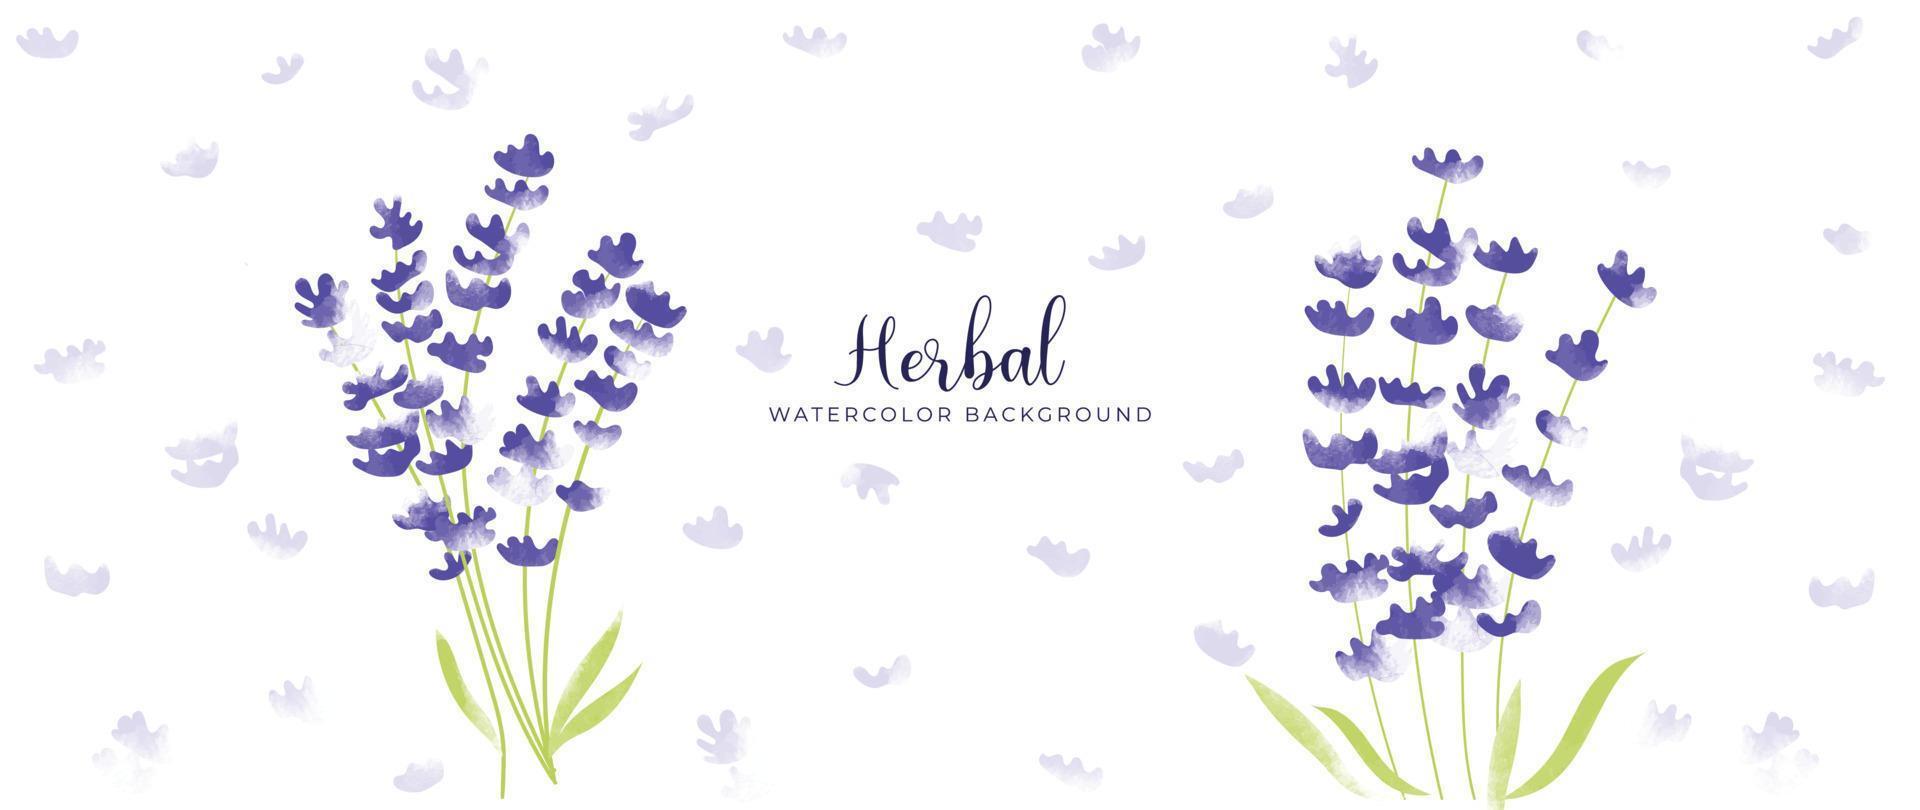 Botanical herbal watercolor background vector. Fresh aromatic hand drawn purple wildflowers. Natural decorative garden floral design for wallpaper, cover, advertising, healthcare product, cosmetics. vector